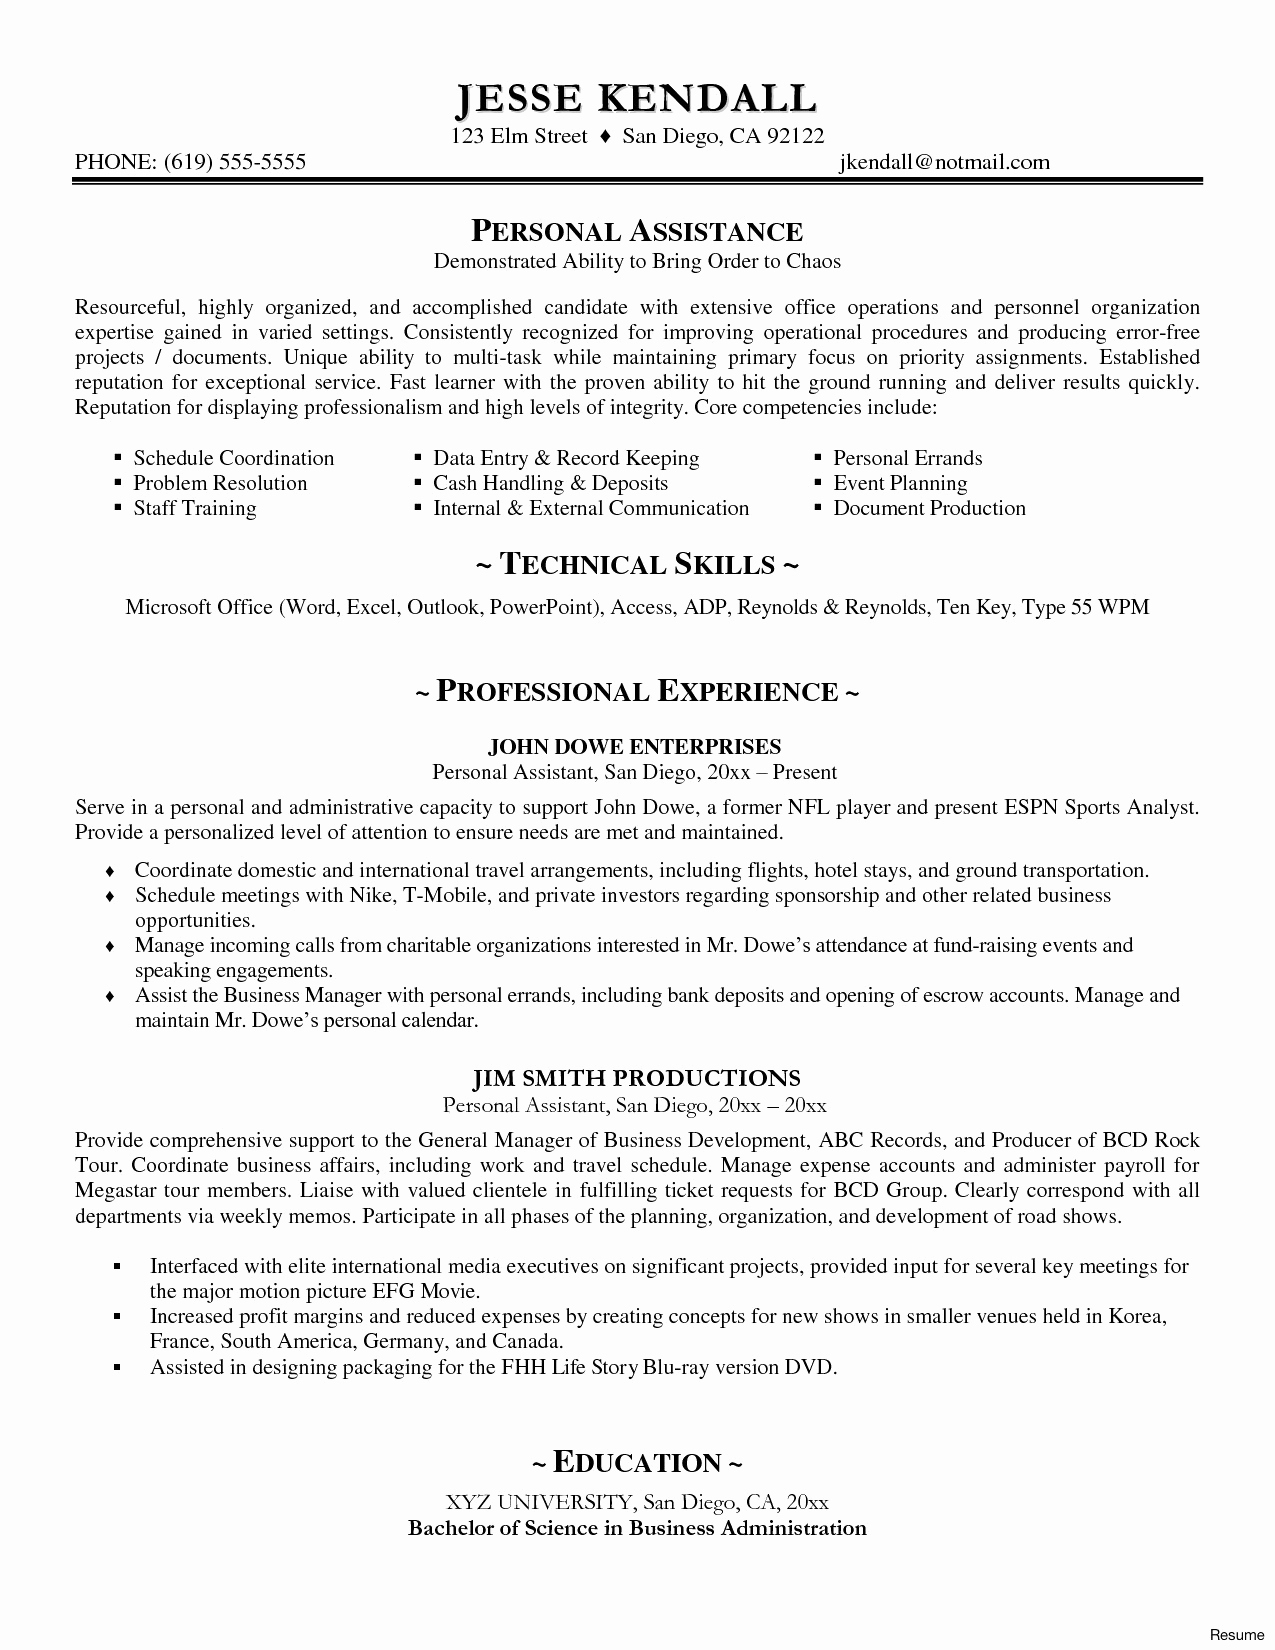 Business Cover Letter Template Download - Free Cover Letter Template Download Awesome Free Microsoft Resume